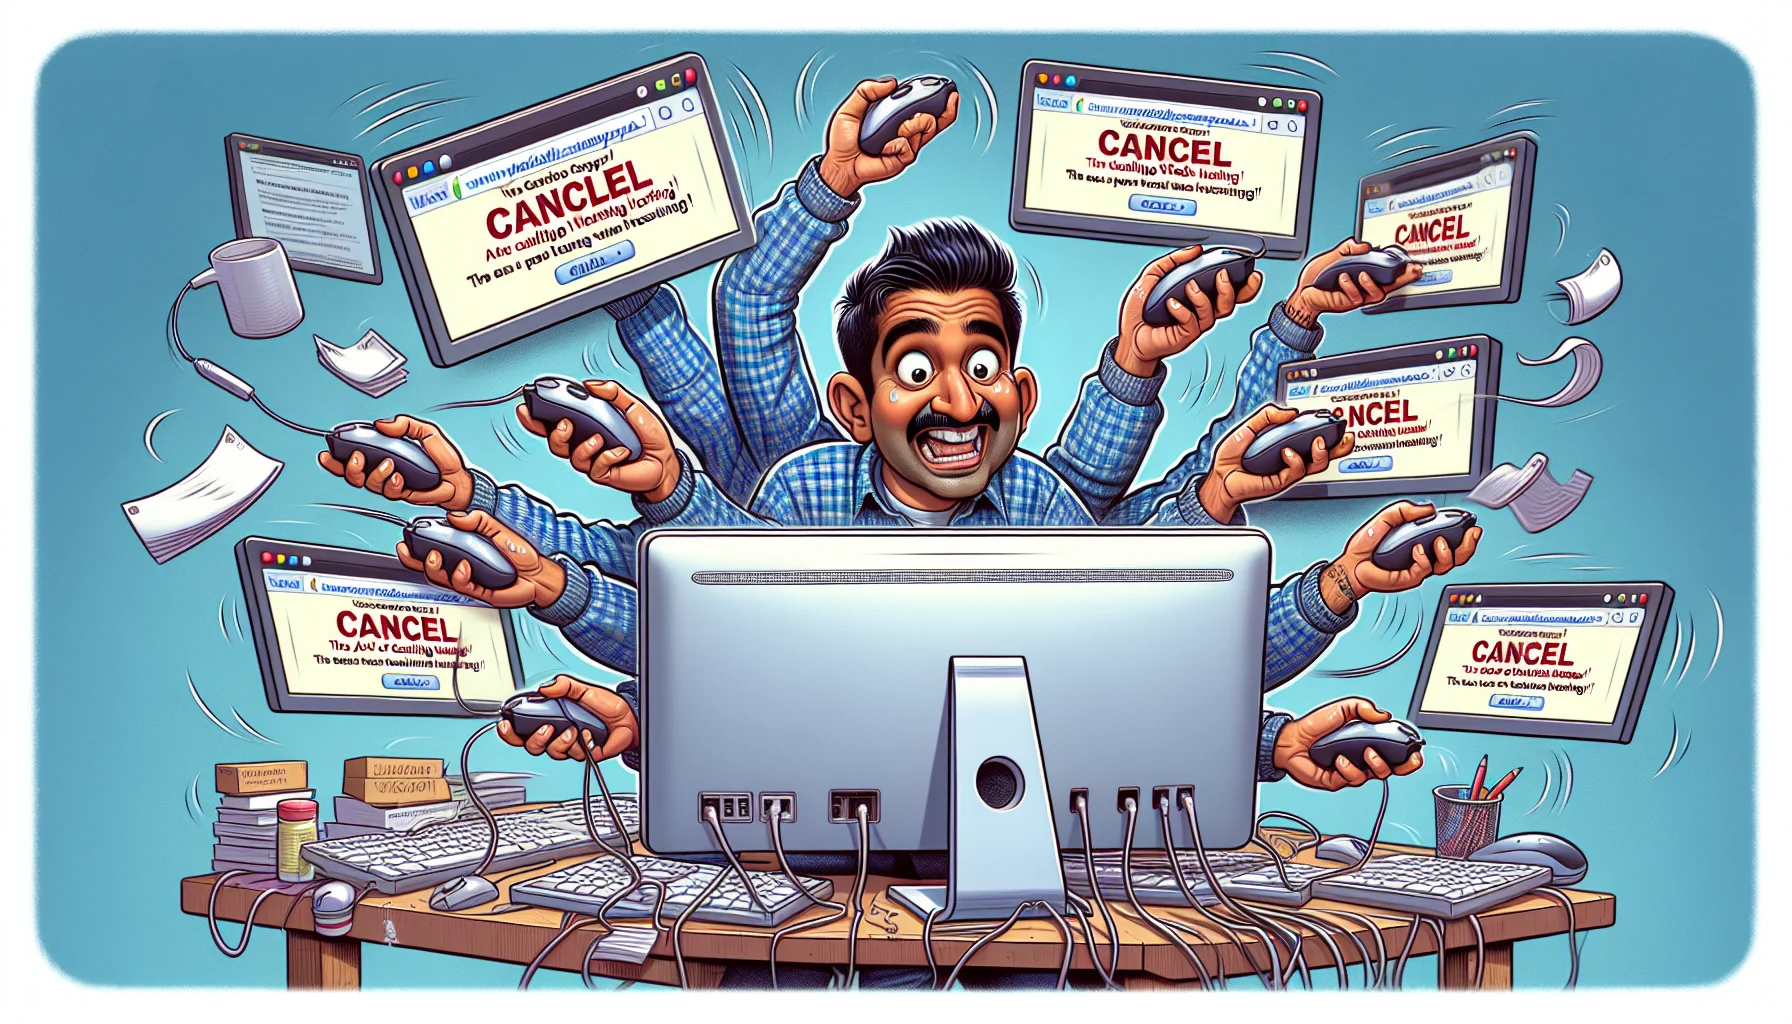 Generate a comedic, cartoon-like image featuring a South Asian male, technology whizz, in front of a computer screen, grappling with numerous pop-up windows from a hypothetical web hosting service called 'AzureHost'. He is juggling with a multitude of mice and keyboards, trying to hit the 'cancel' button on each popup, while a laugh-inducing banner flows above him reading, 'The Art of Cancelling Web Hosting!'. The whole scene is designed to evoke the quirky challenges and humor of managing web services.